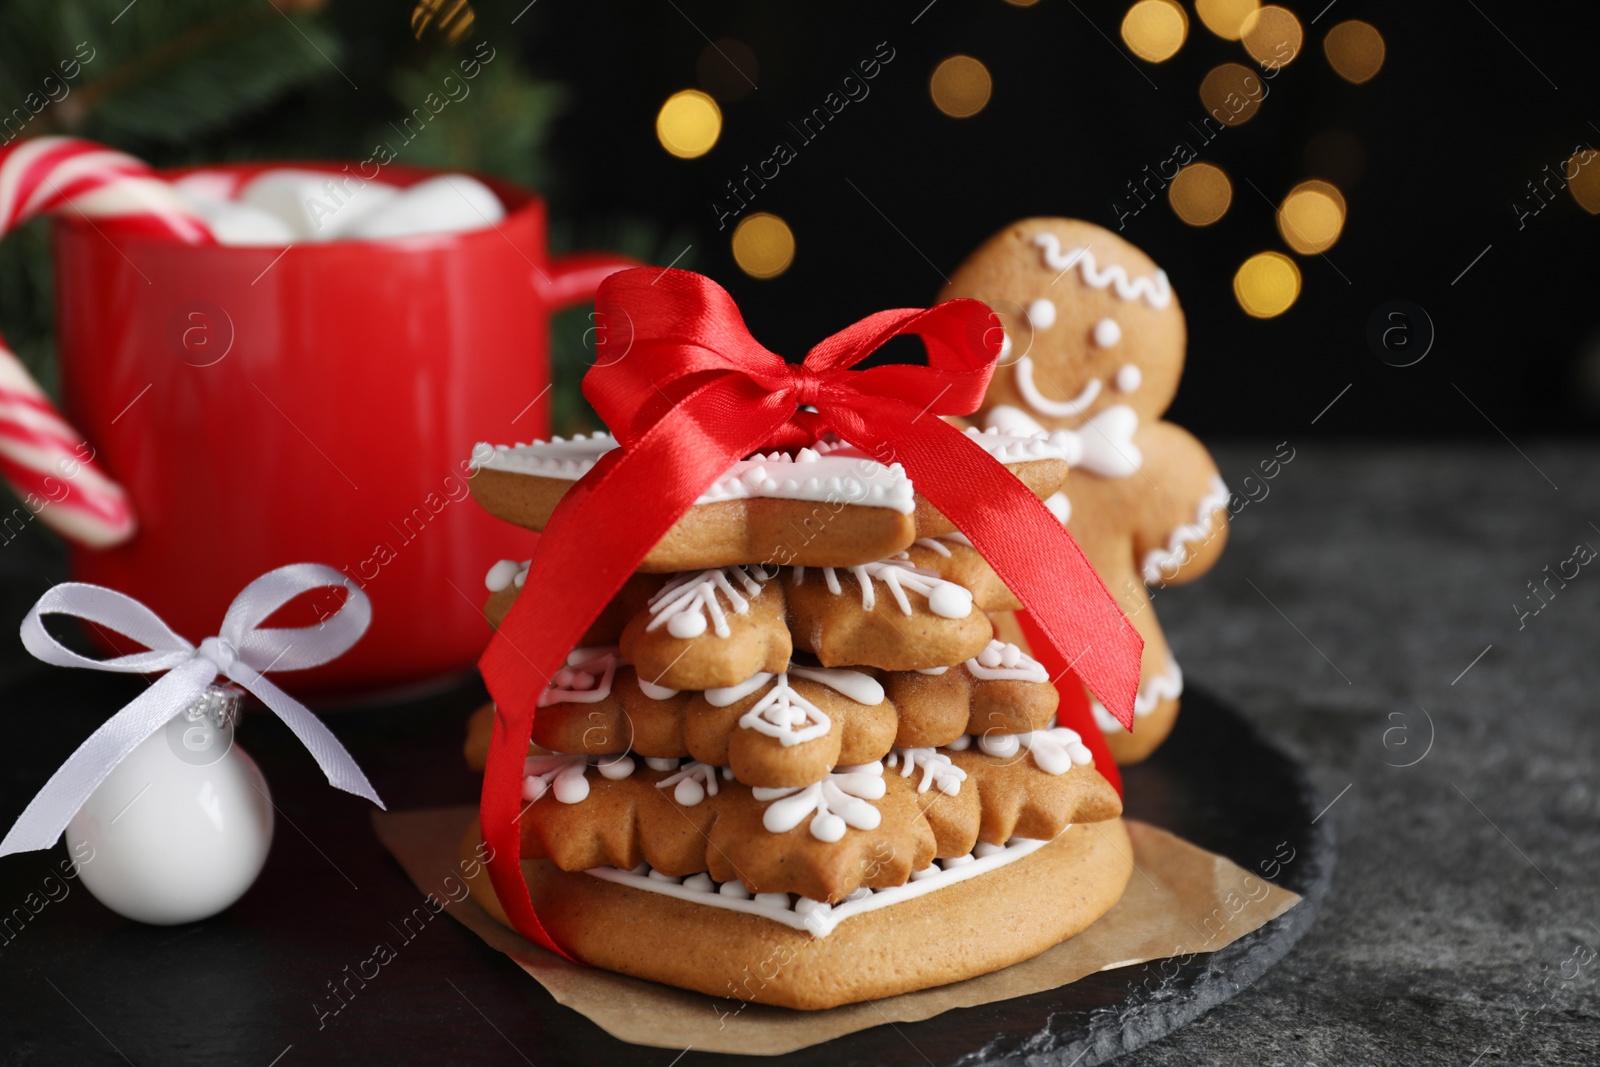 Photo of Decorated Christmas cookies and cup of delicious drink on grey table against blurred festive lights